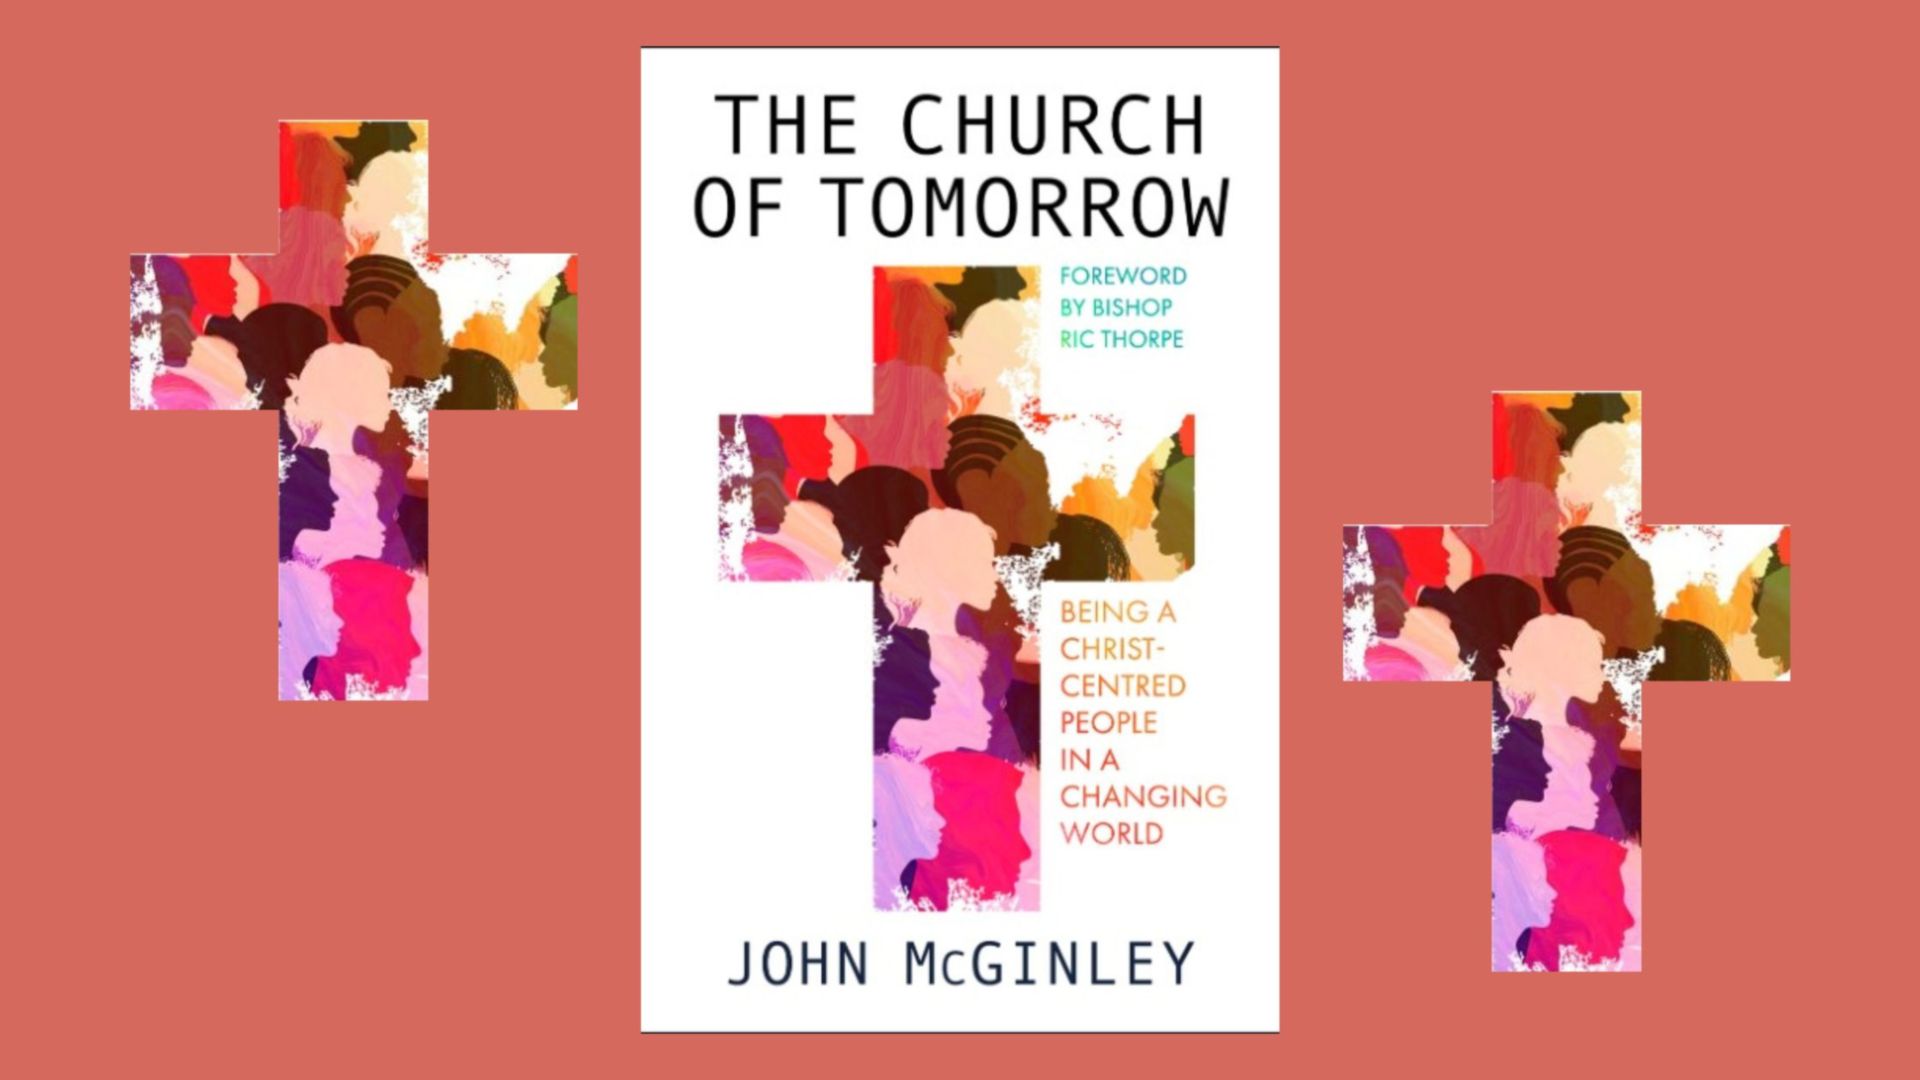 An interview with John McGinley, author of the book 'The Church of Tomorrow'